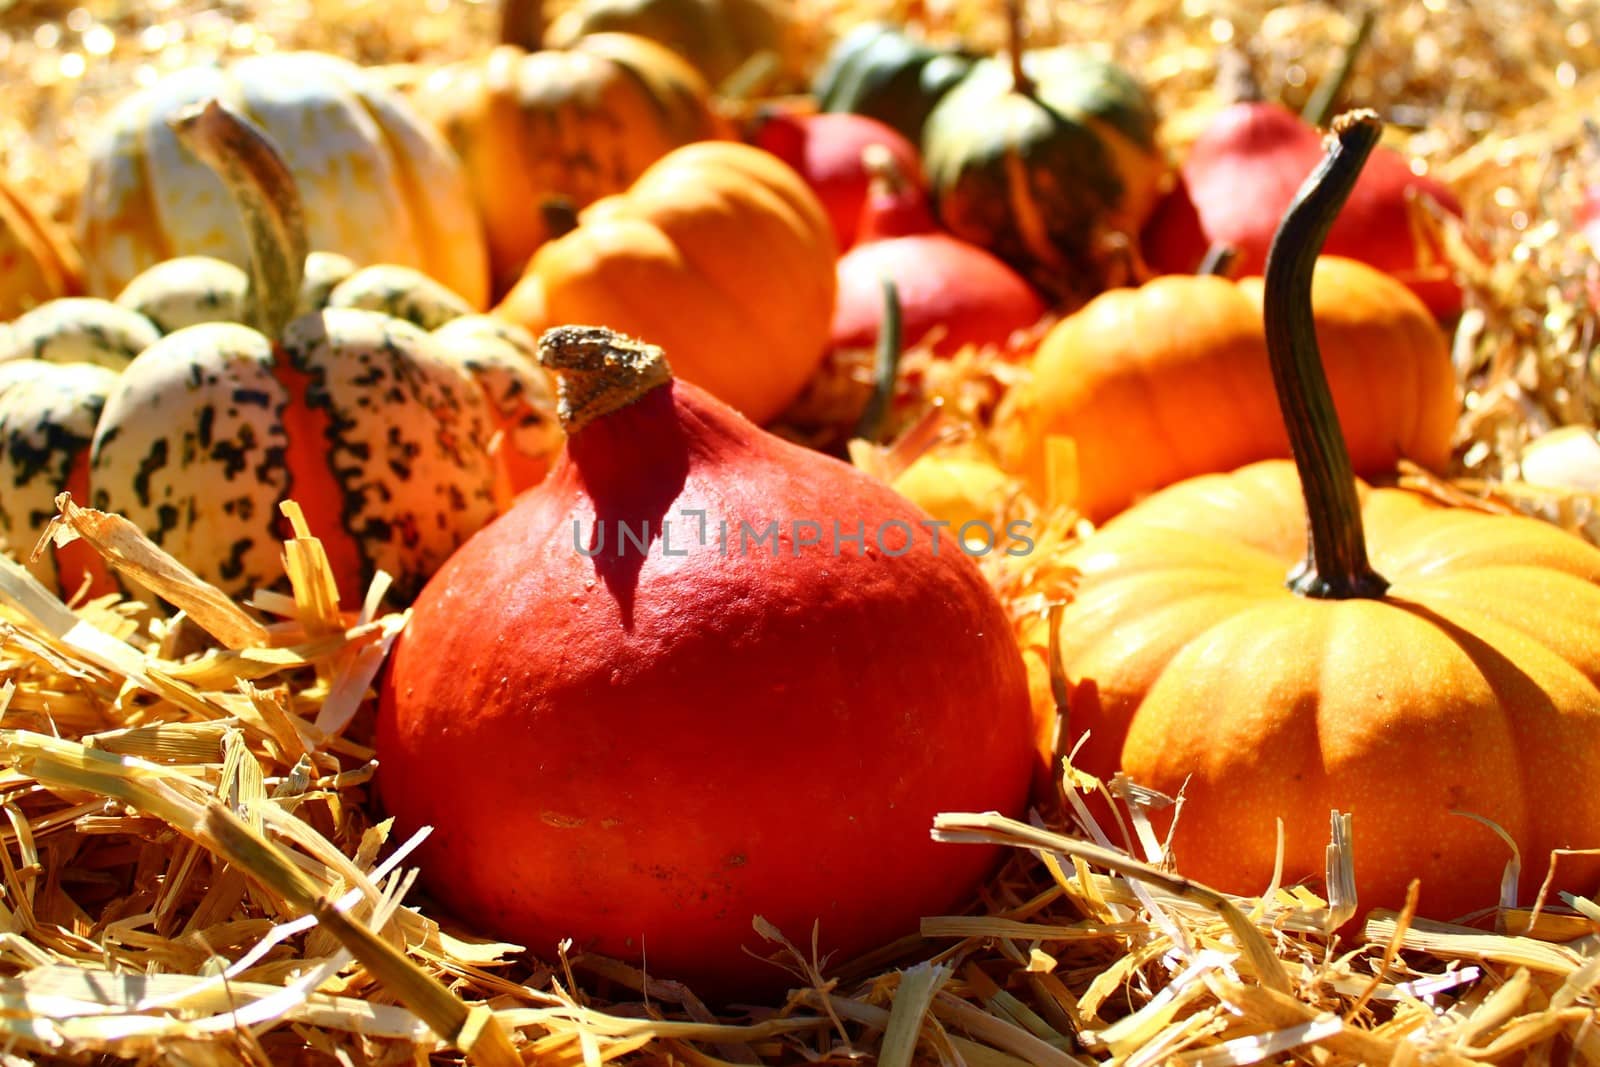 The picture shows different pumpkins on straw